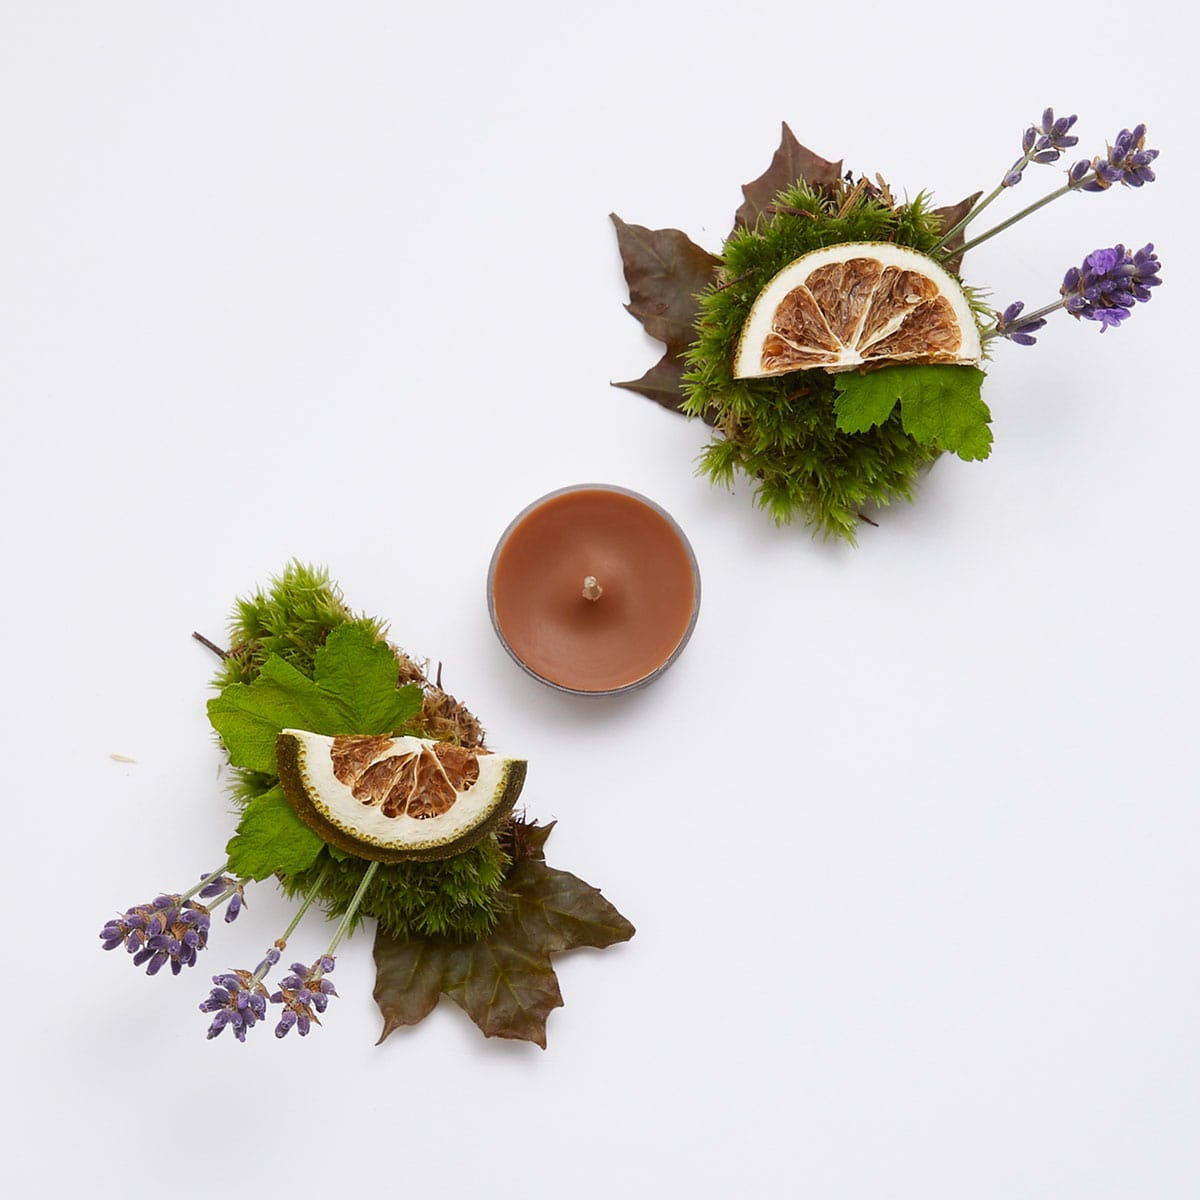 Falling Leaves Universal Tealight Candles